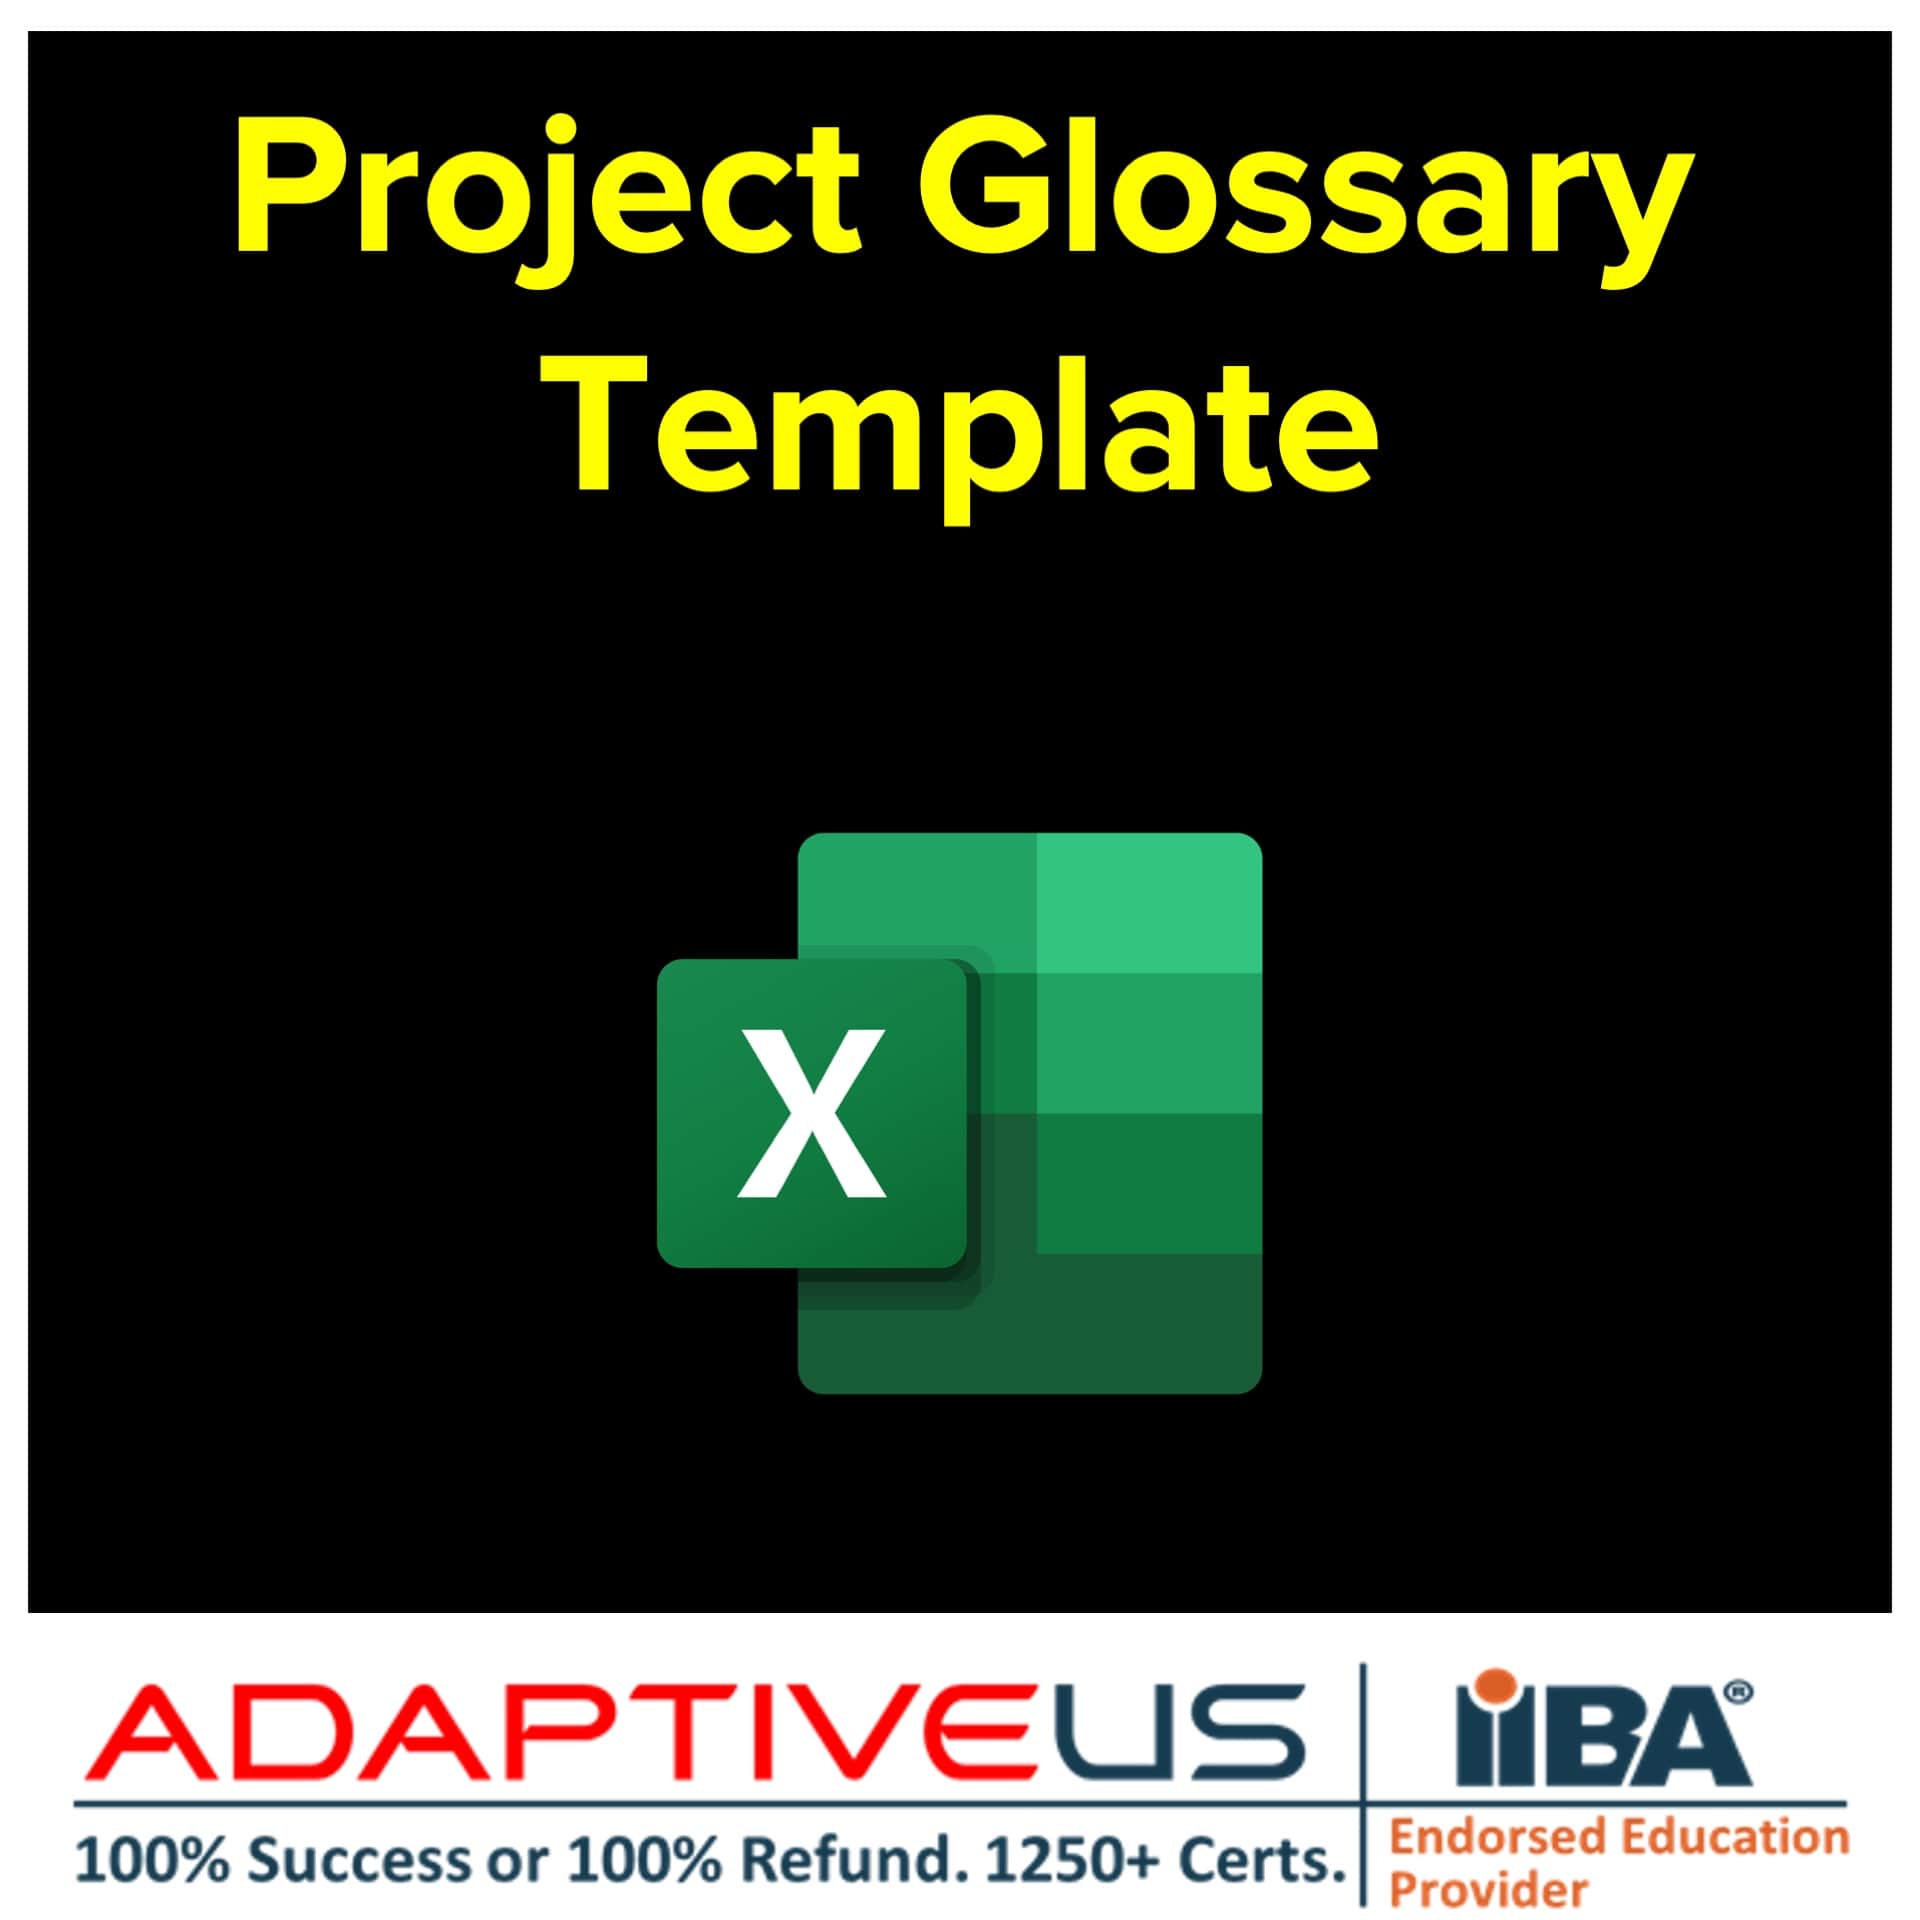 Project Glossary Template